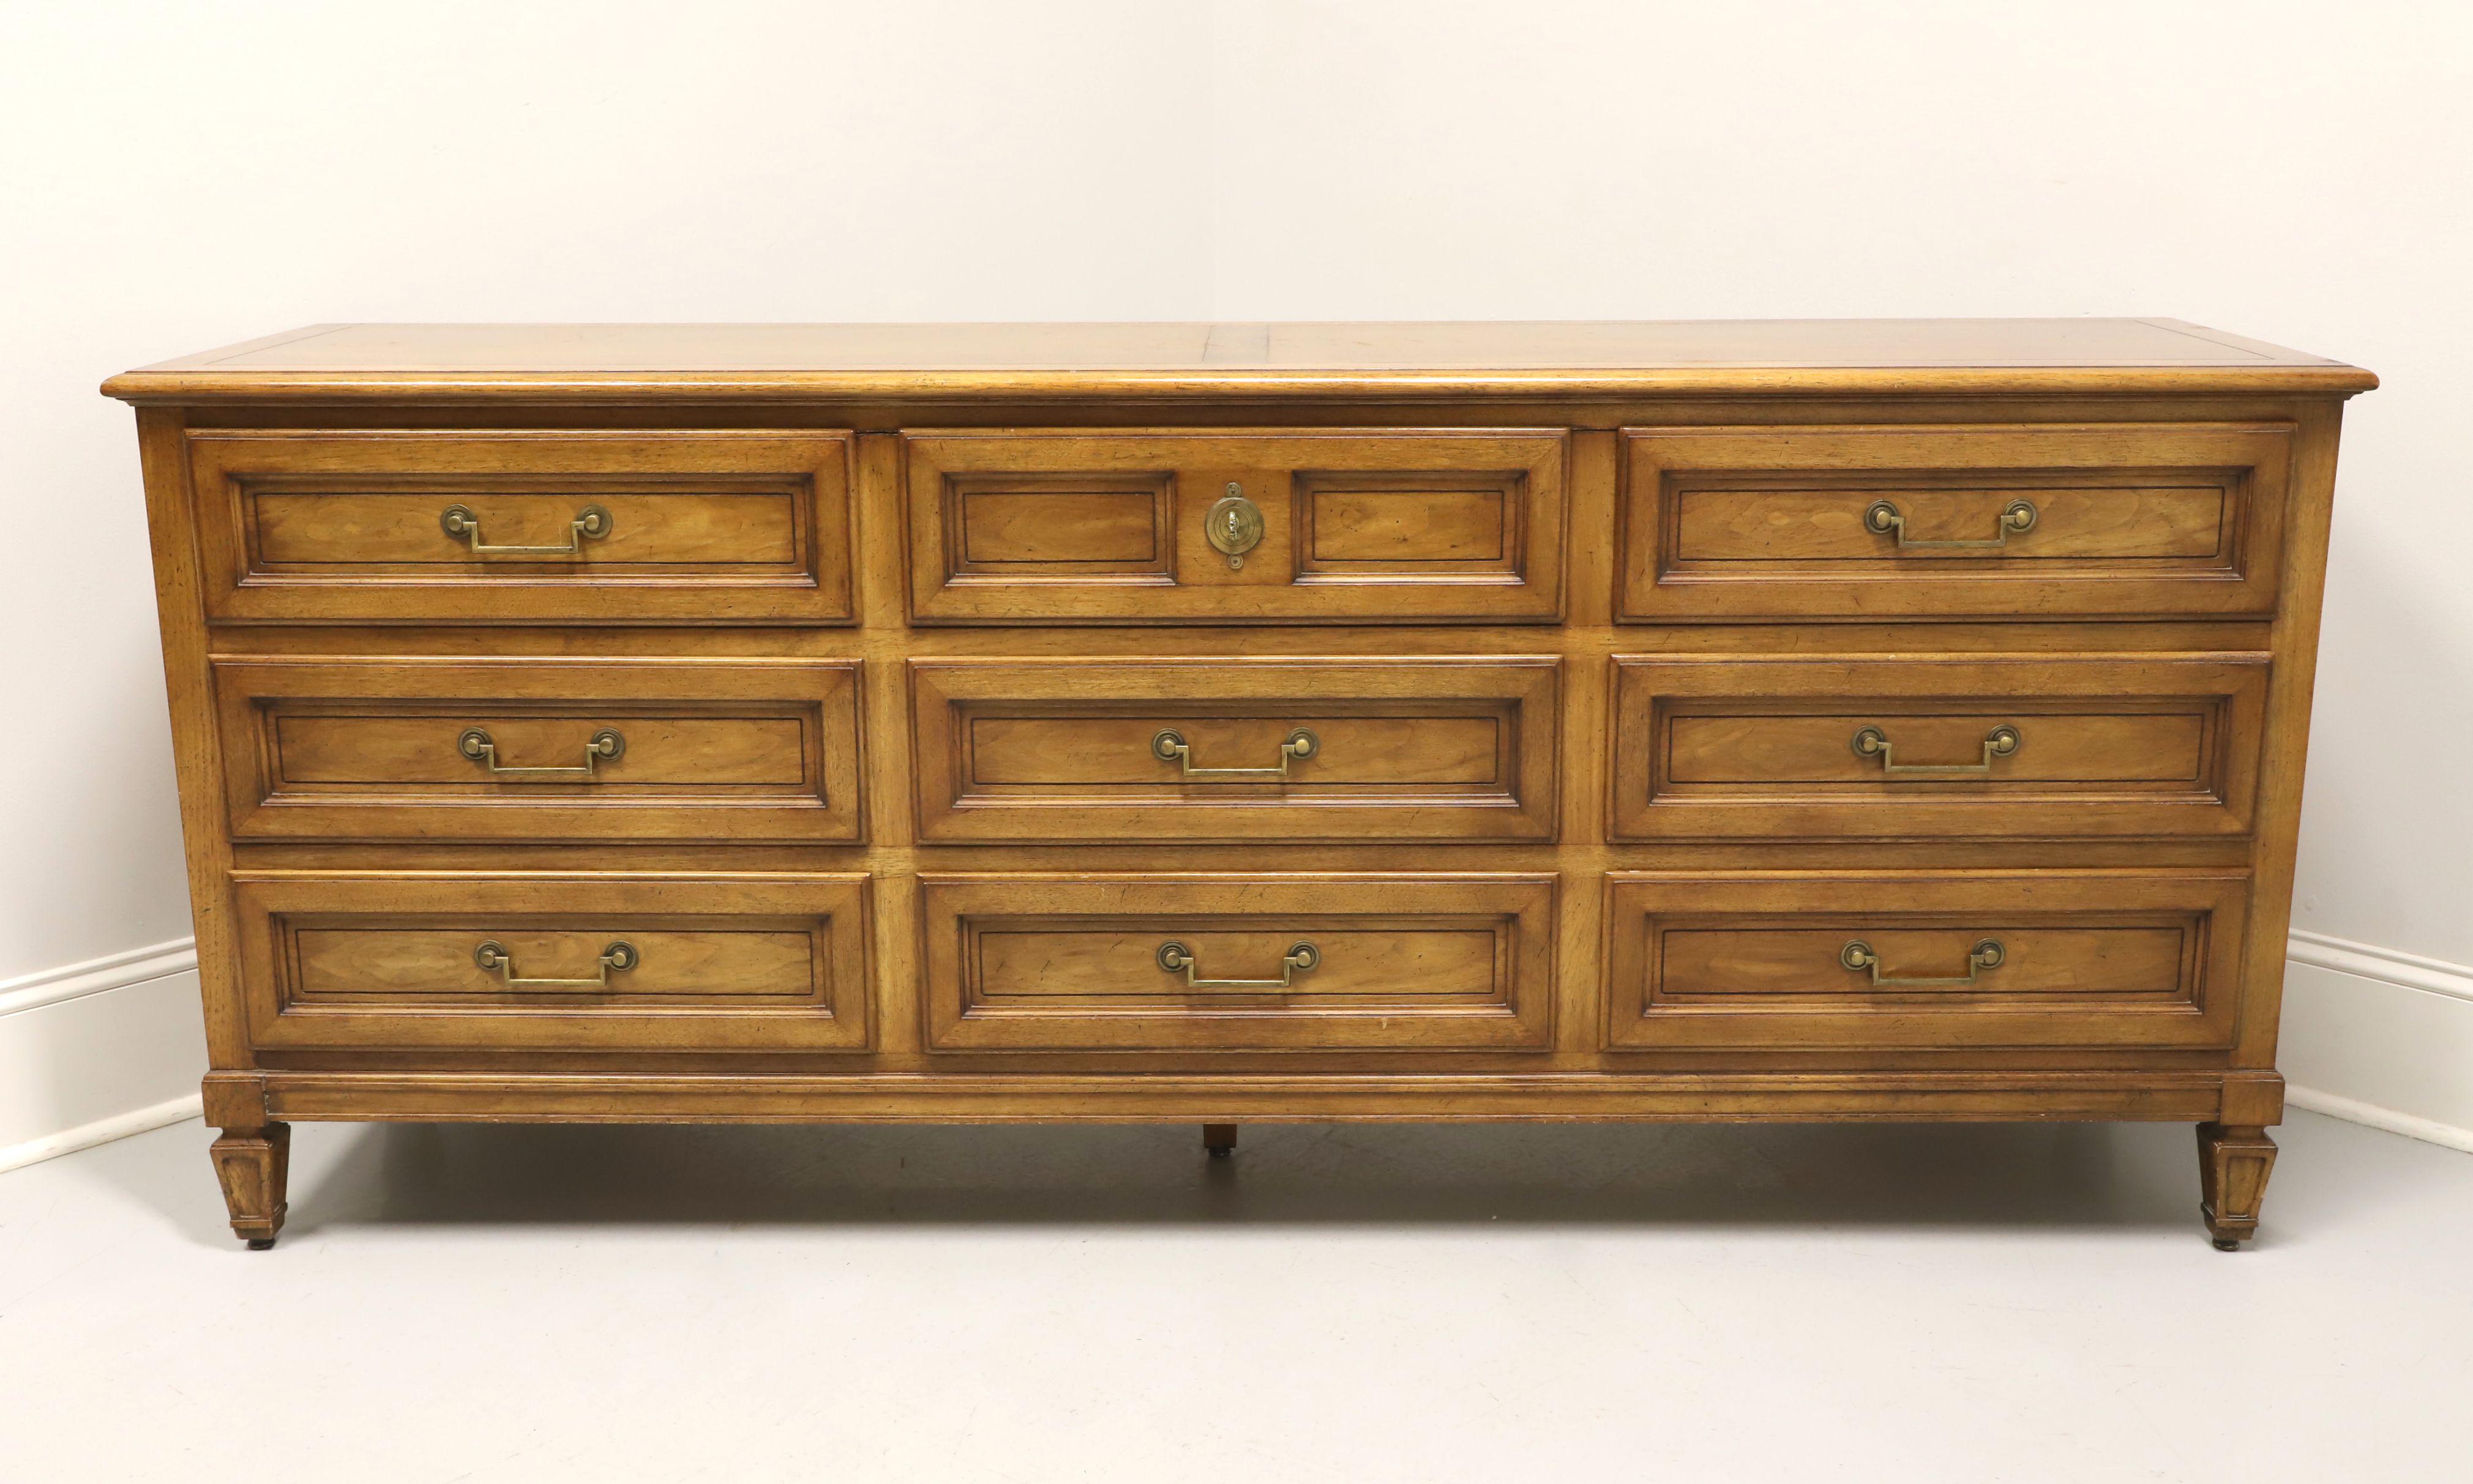 A classic Mid Century style triple dresser by Baker Furniture Company, for their Milling Road Division. Walnut with slightly distressed finish, banded top, brass hardware, raised drawer fronts and spade feet. Features nine drawers of dovetail